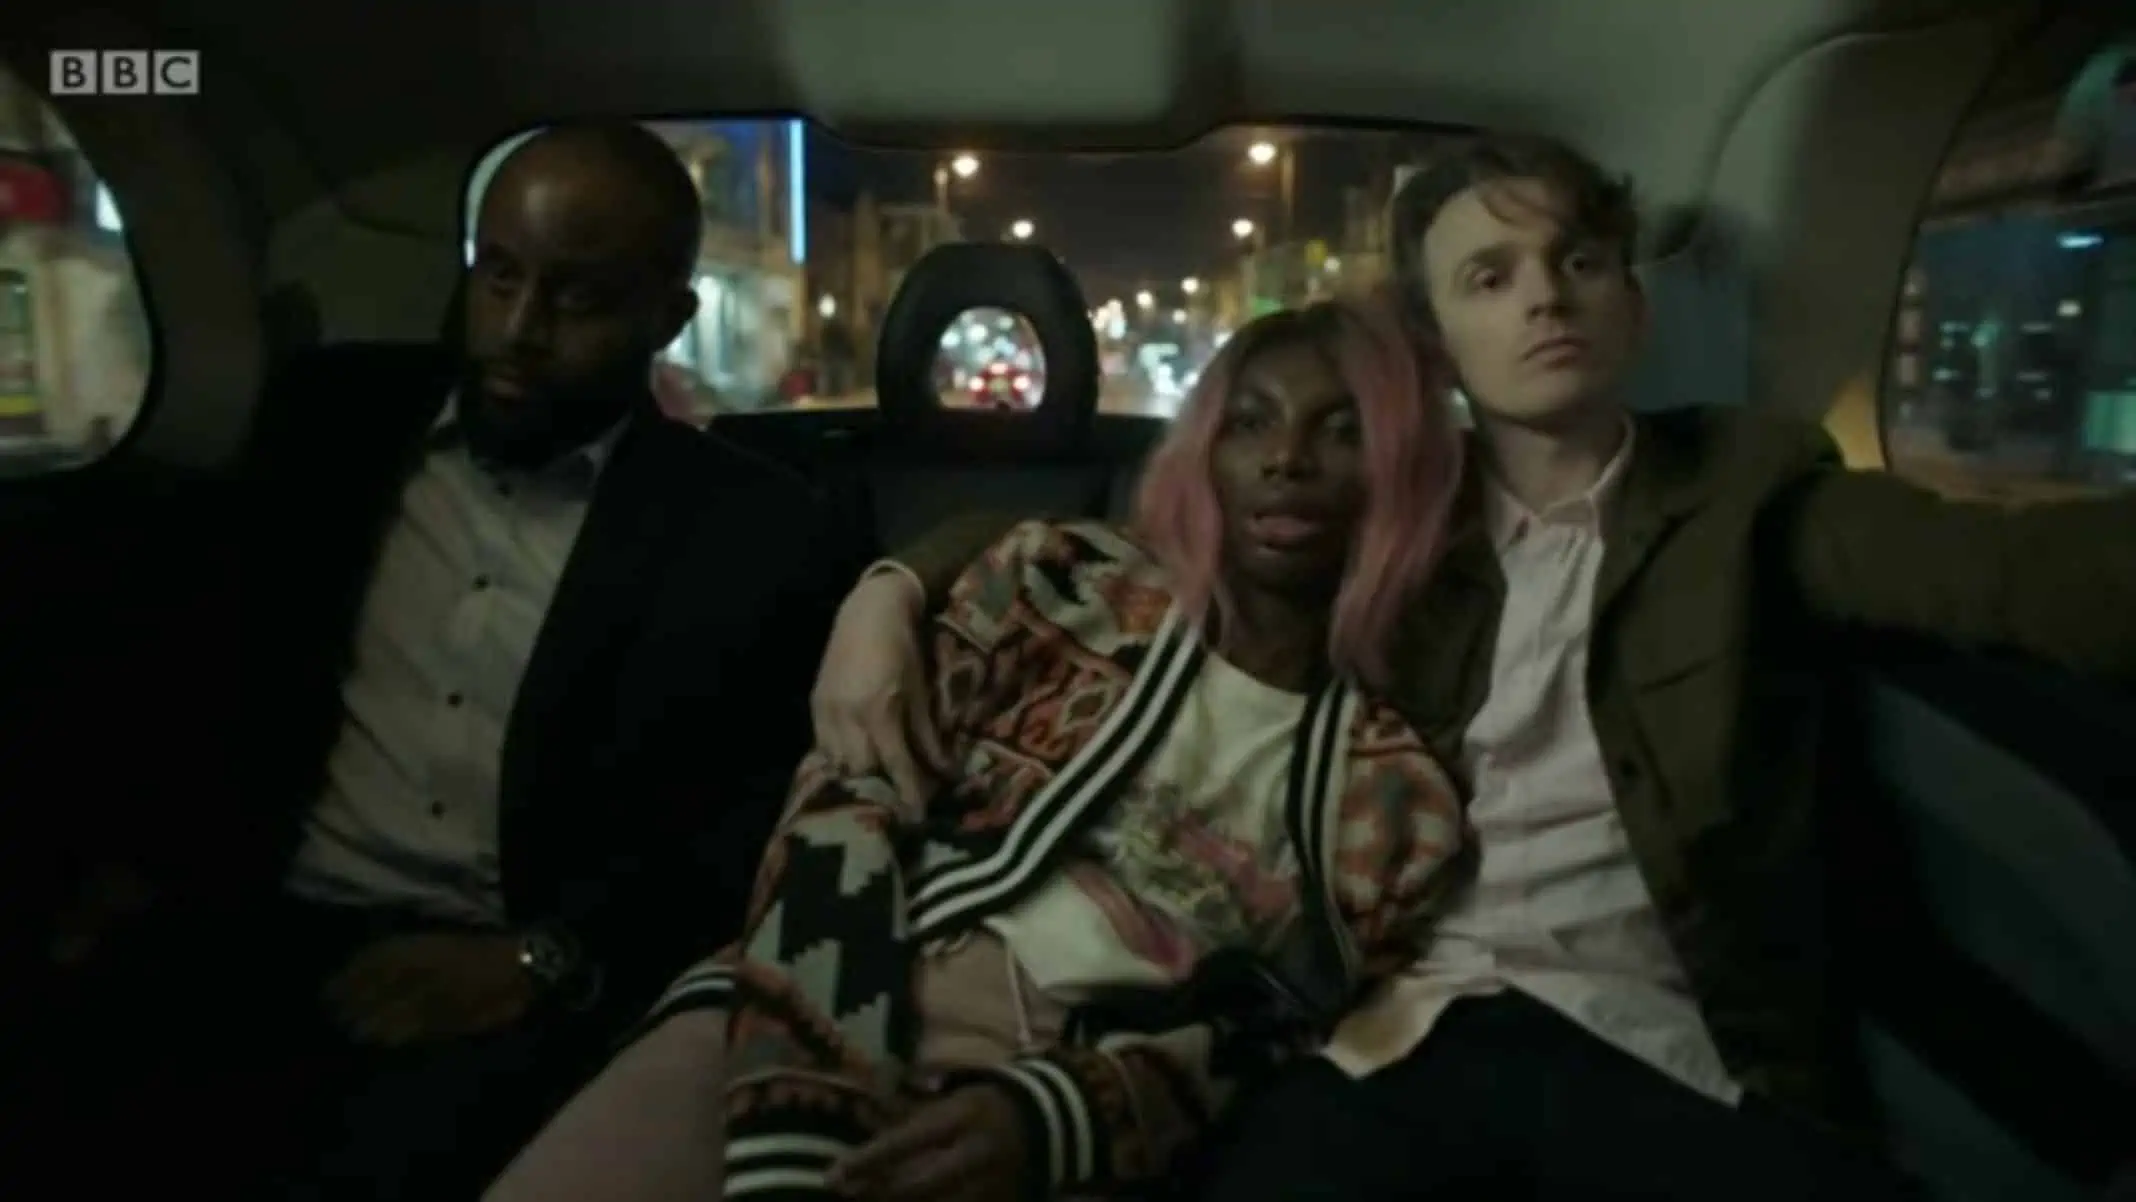 Tariq (Chin Nyenwe), Arabella (Michaela Coel) and David (Lewis Reeves) going to the place Arabella was assaulted.